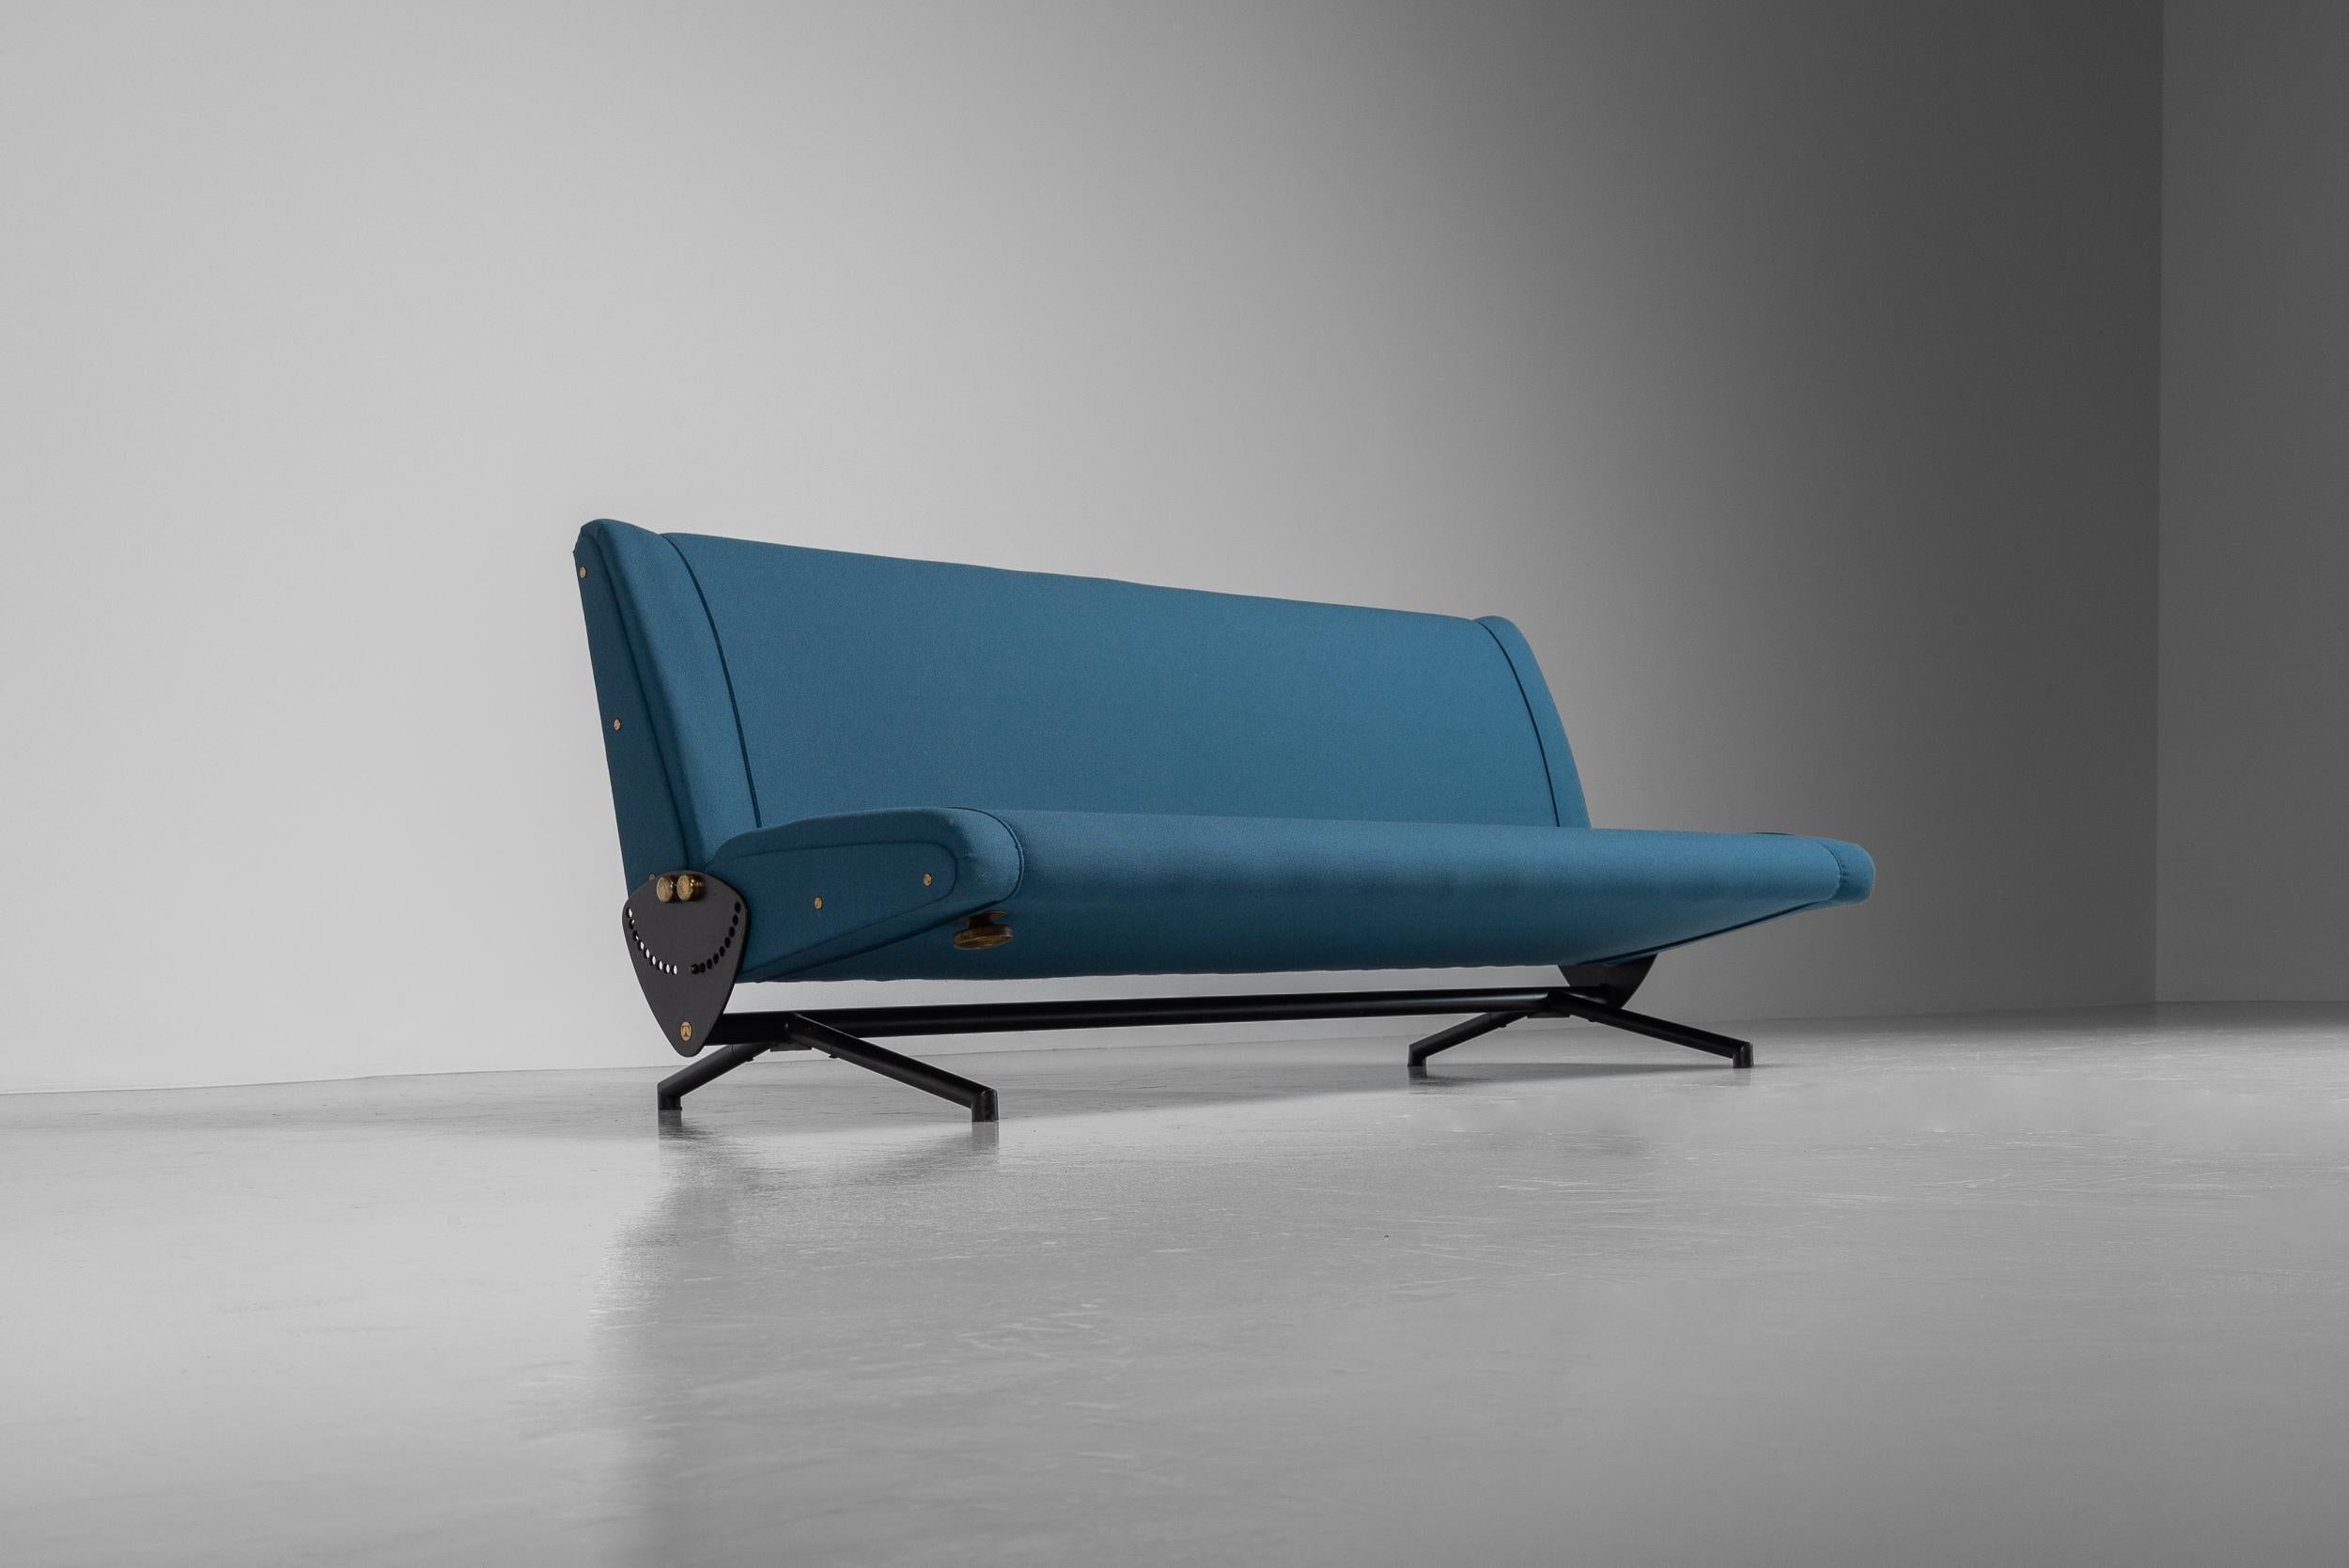 Beautiful D70 daybed/sofa designed by Osvaldo Borsani D70 and manufactured by Tecno in Italy in 1954. This comfortable daybed/sofa is truly unique. What sets it apart is the special mechanism that allows you to adjust the angles between the seat and